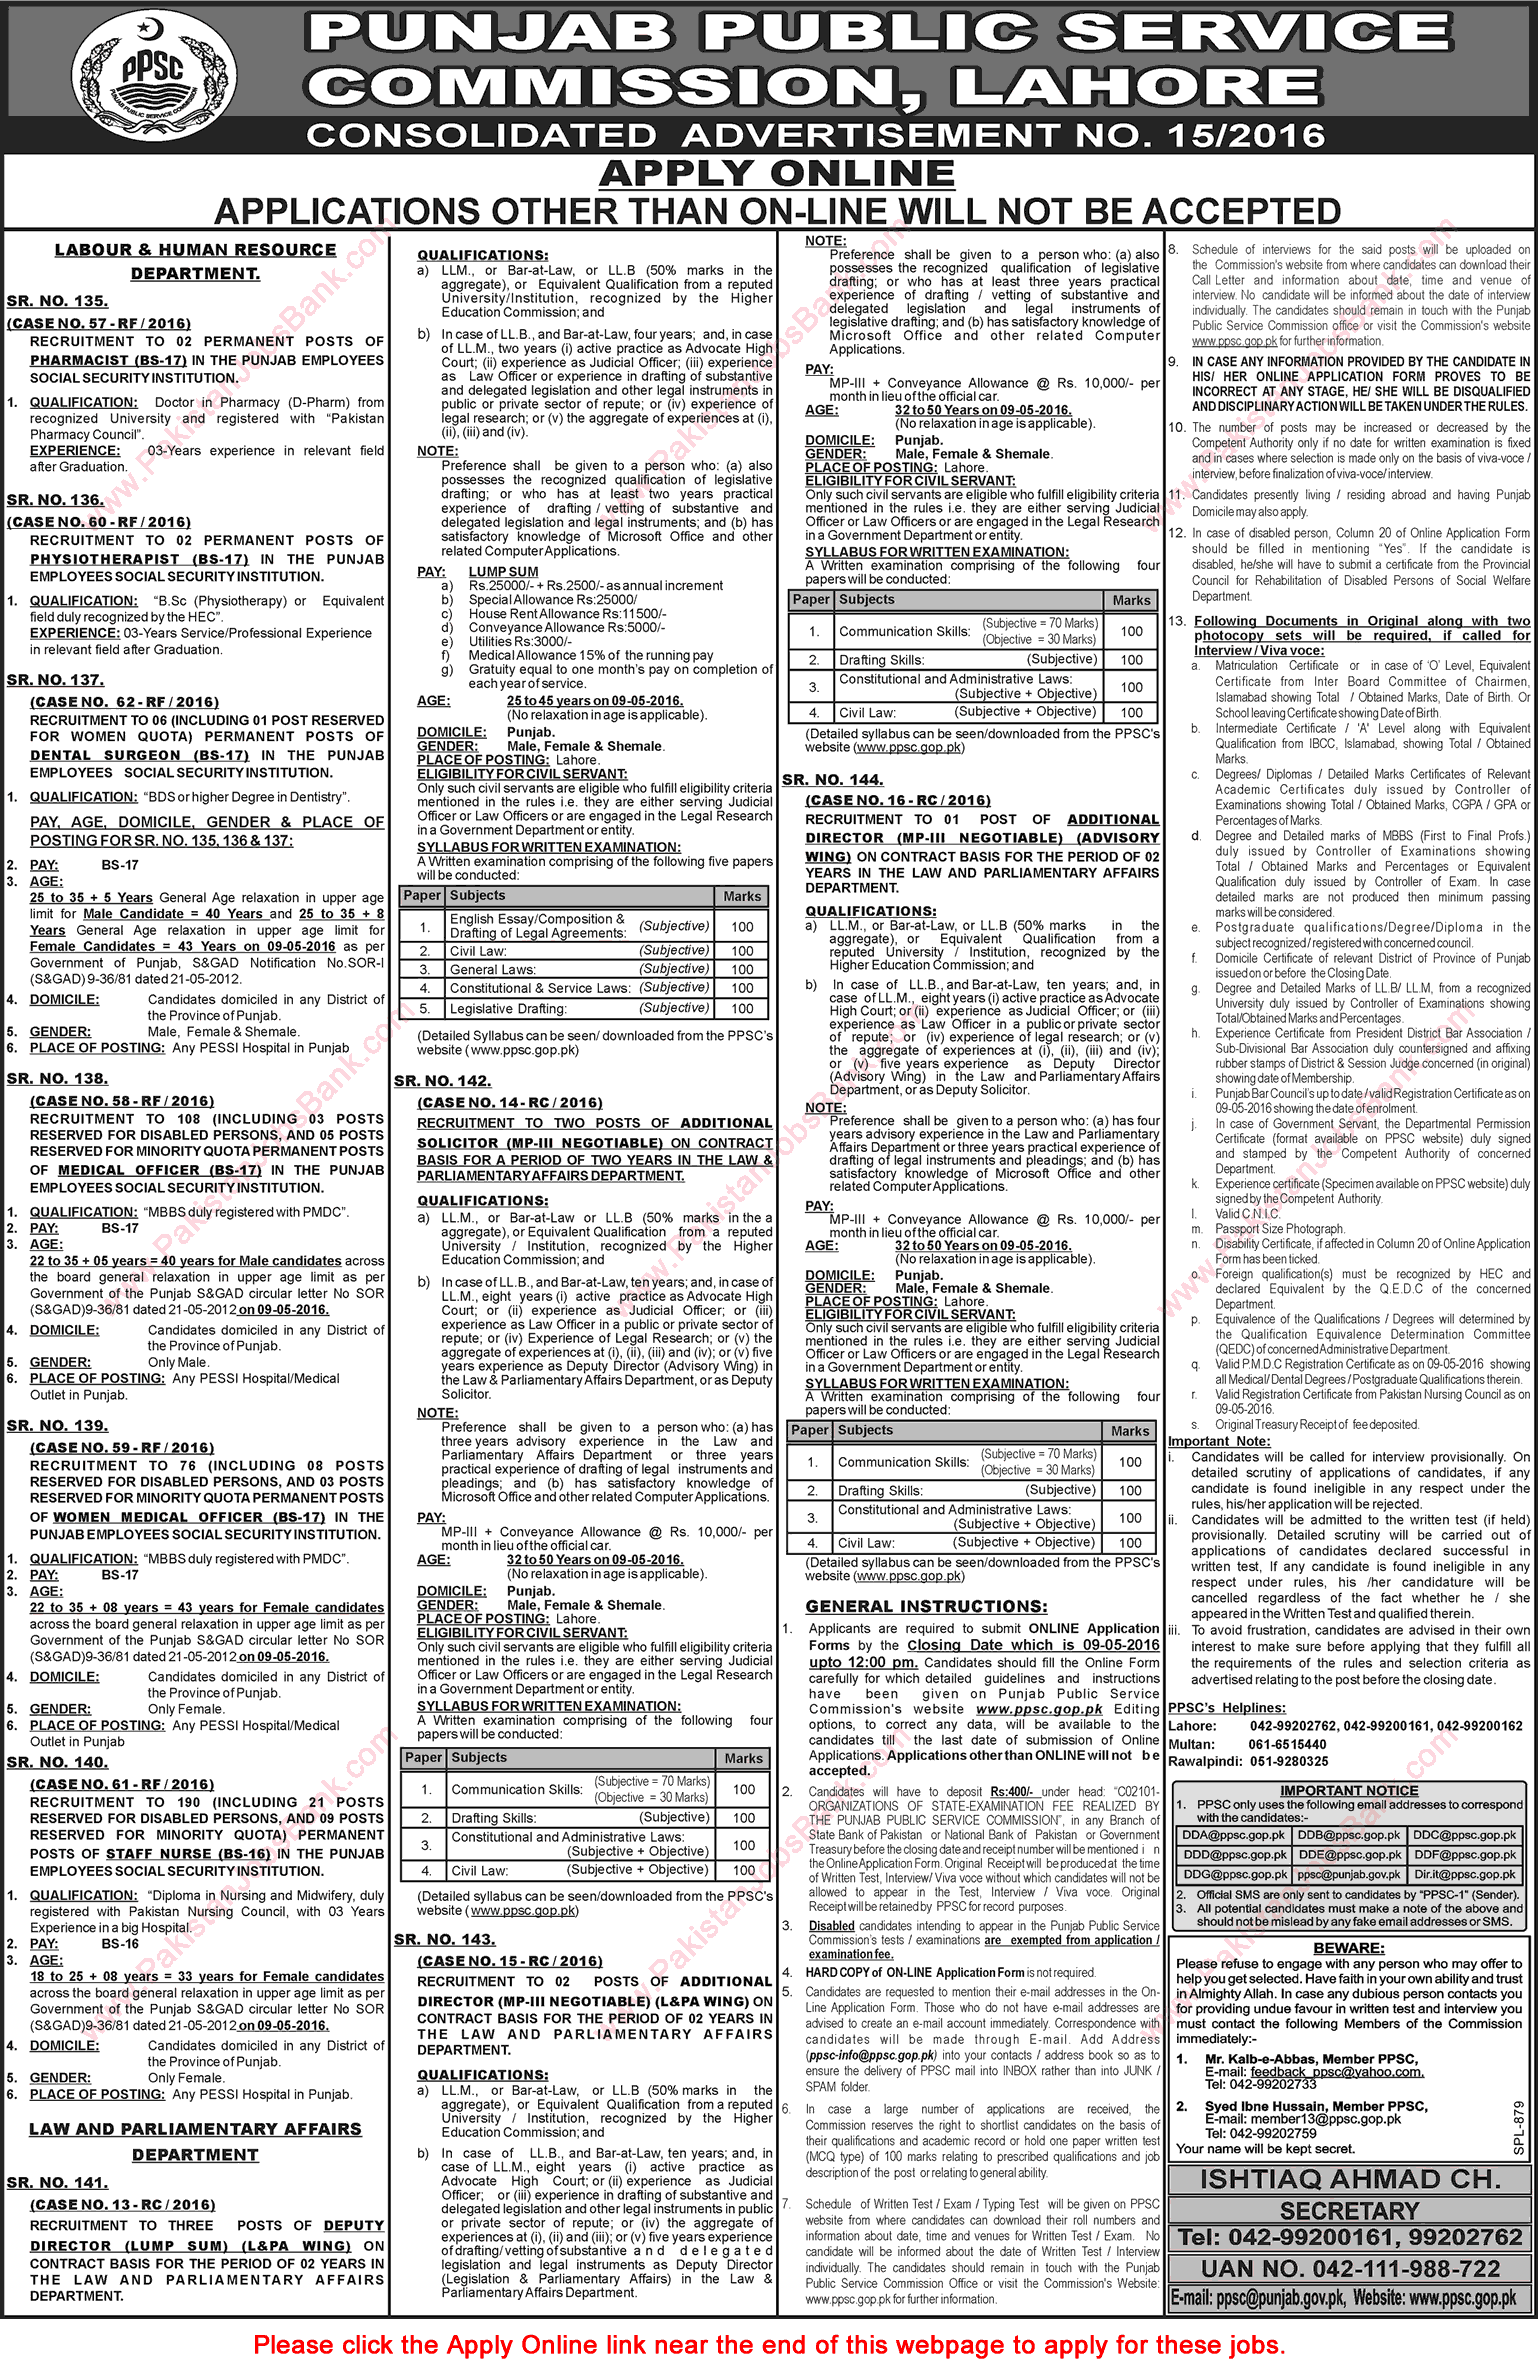 PPSC Jobs April 2016 Consolidated Advertisement No 15/2016 Apply Online Latest